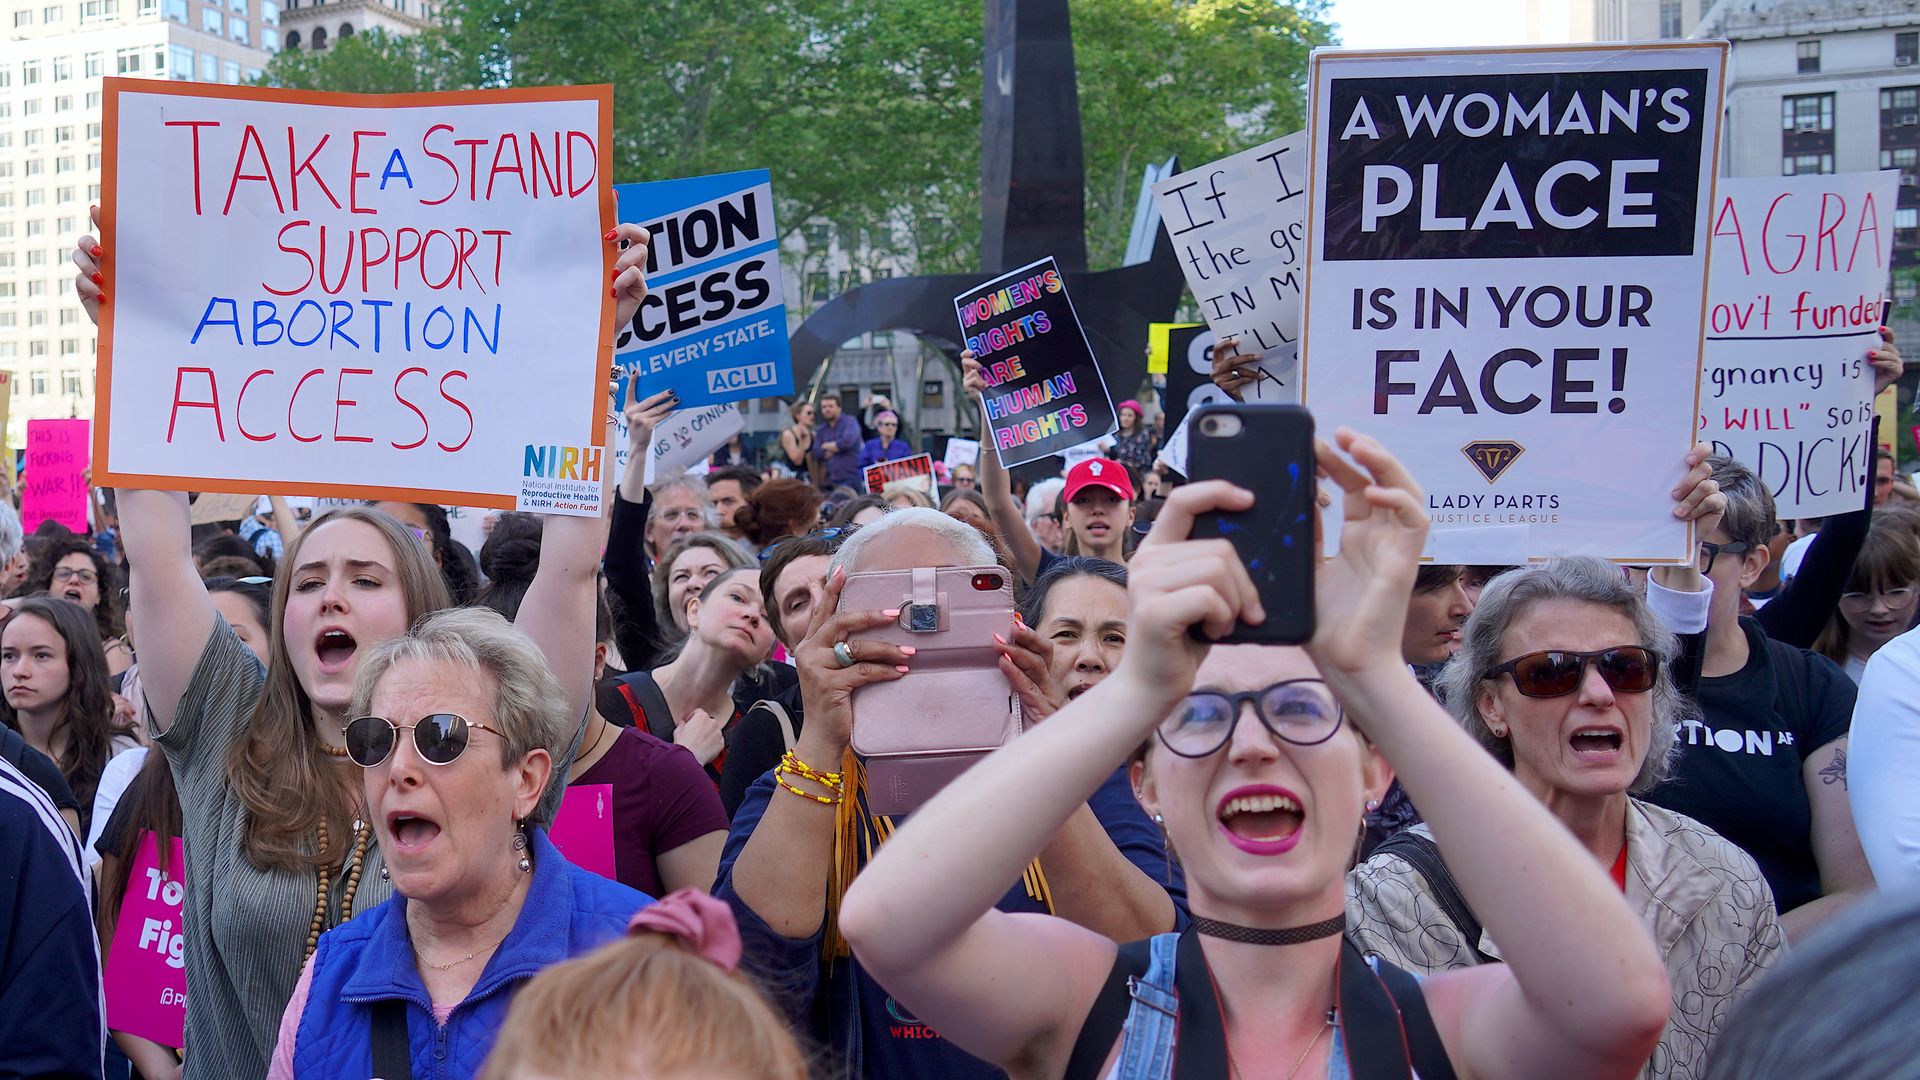 In this image, protestors hold pro-abortion signs.